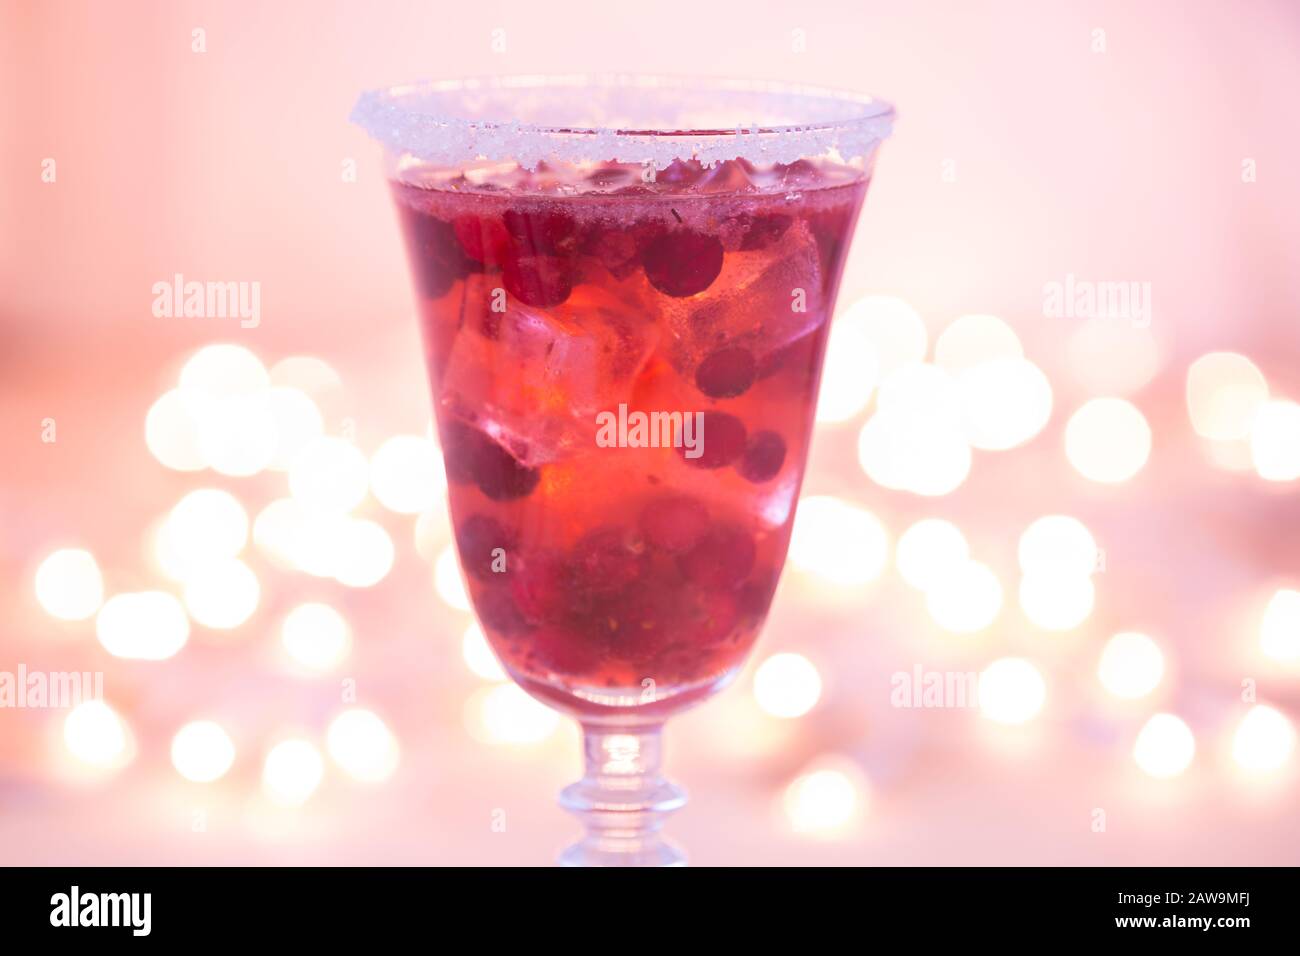 Glass of champagne and cranberry cocktail, macro. Lightweight background. Christmas mood. Vintage style. Shifted white balance, pink tone. Horizontal Stock Photo